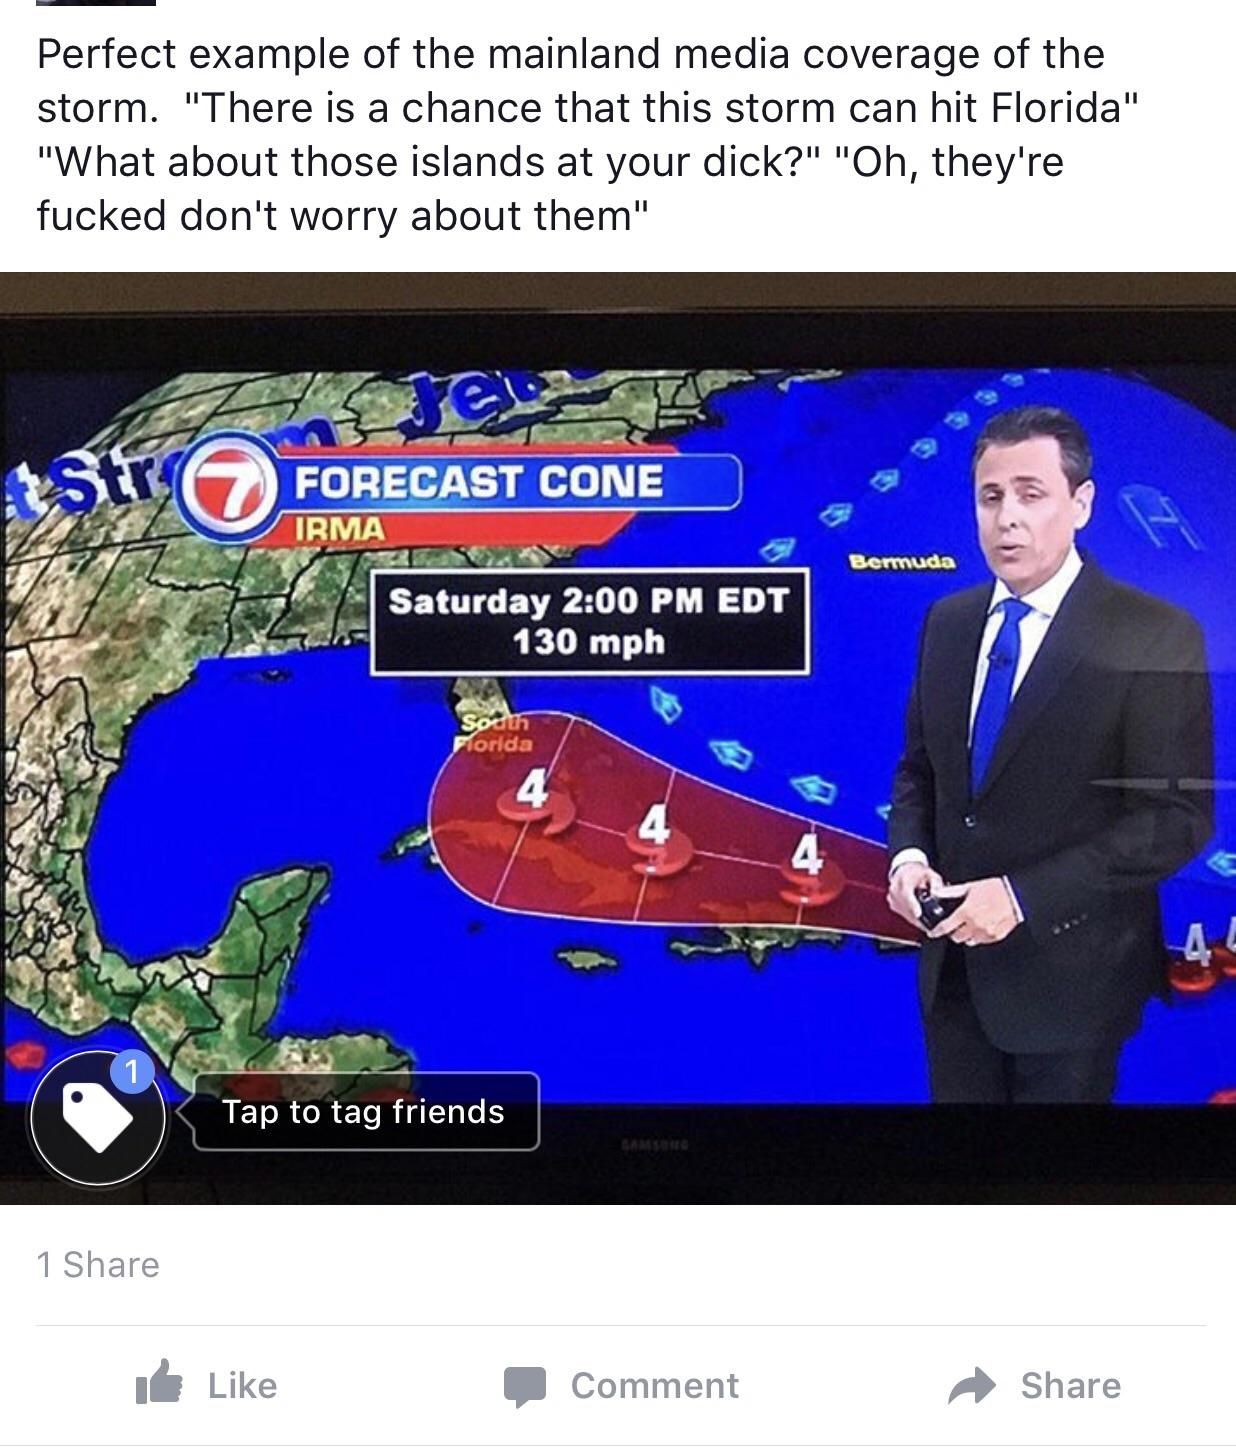 As someone who lives in the US Virgin Islands this is what all the coverage of hurricane Irma feels like.